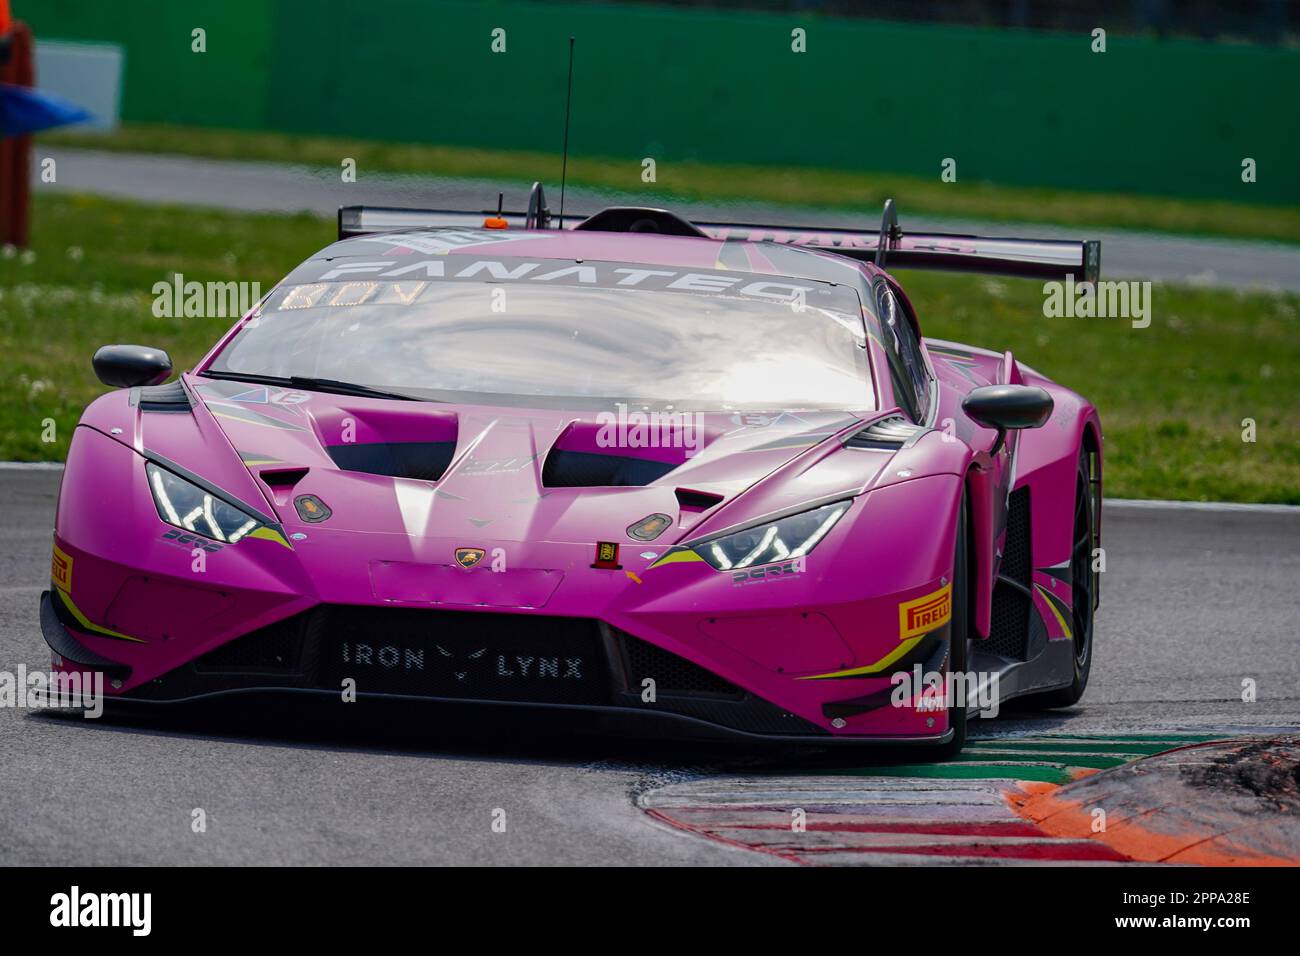 Monza, Italy. 23rd Apr, 2023. The #83 Iron Dames Lamborghini Huracan GT3 EVO2 of Sarah BOVY, Michelle GATTING and Rahel FREY (BRONZE) during the Fanatec GT World Challenge Europe at Autodromo di Monza on April 22, 2023 in Monza, Italy. Credit: Luca Rossini/E-Mage/Alamy Live News Stock Photo